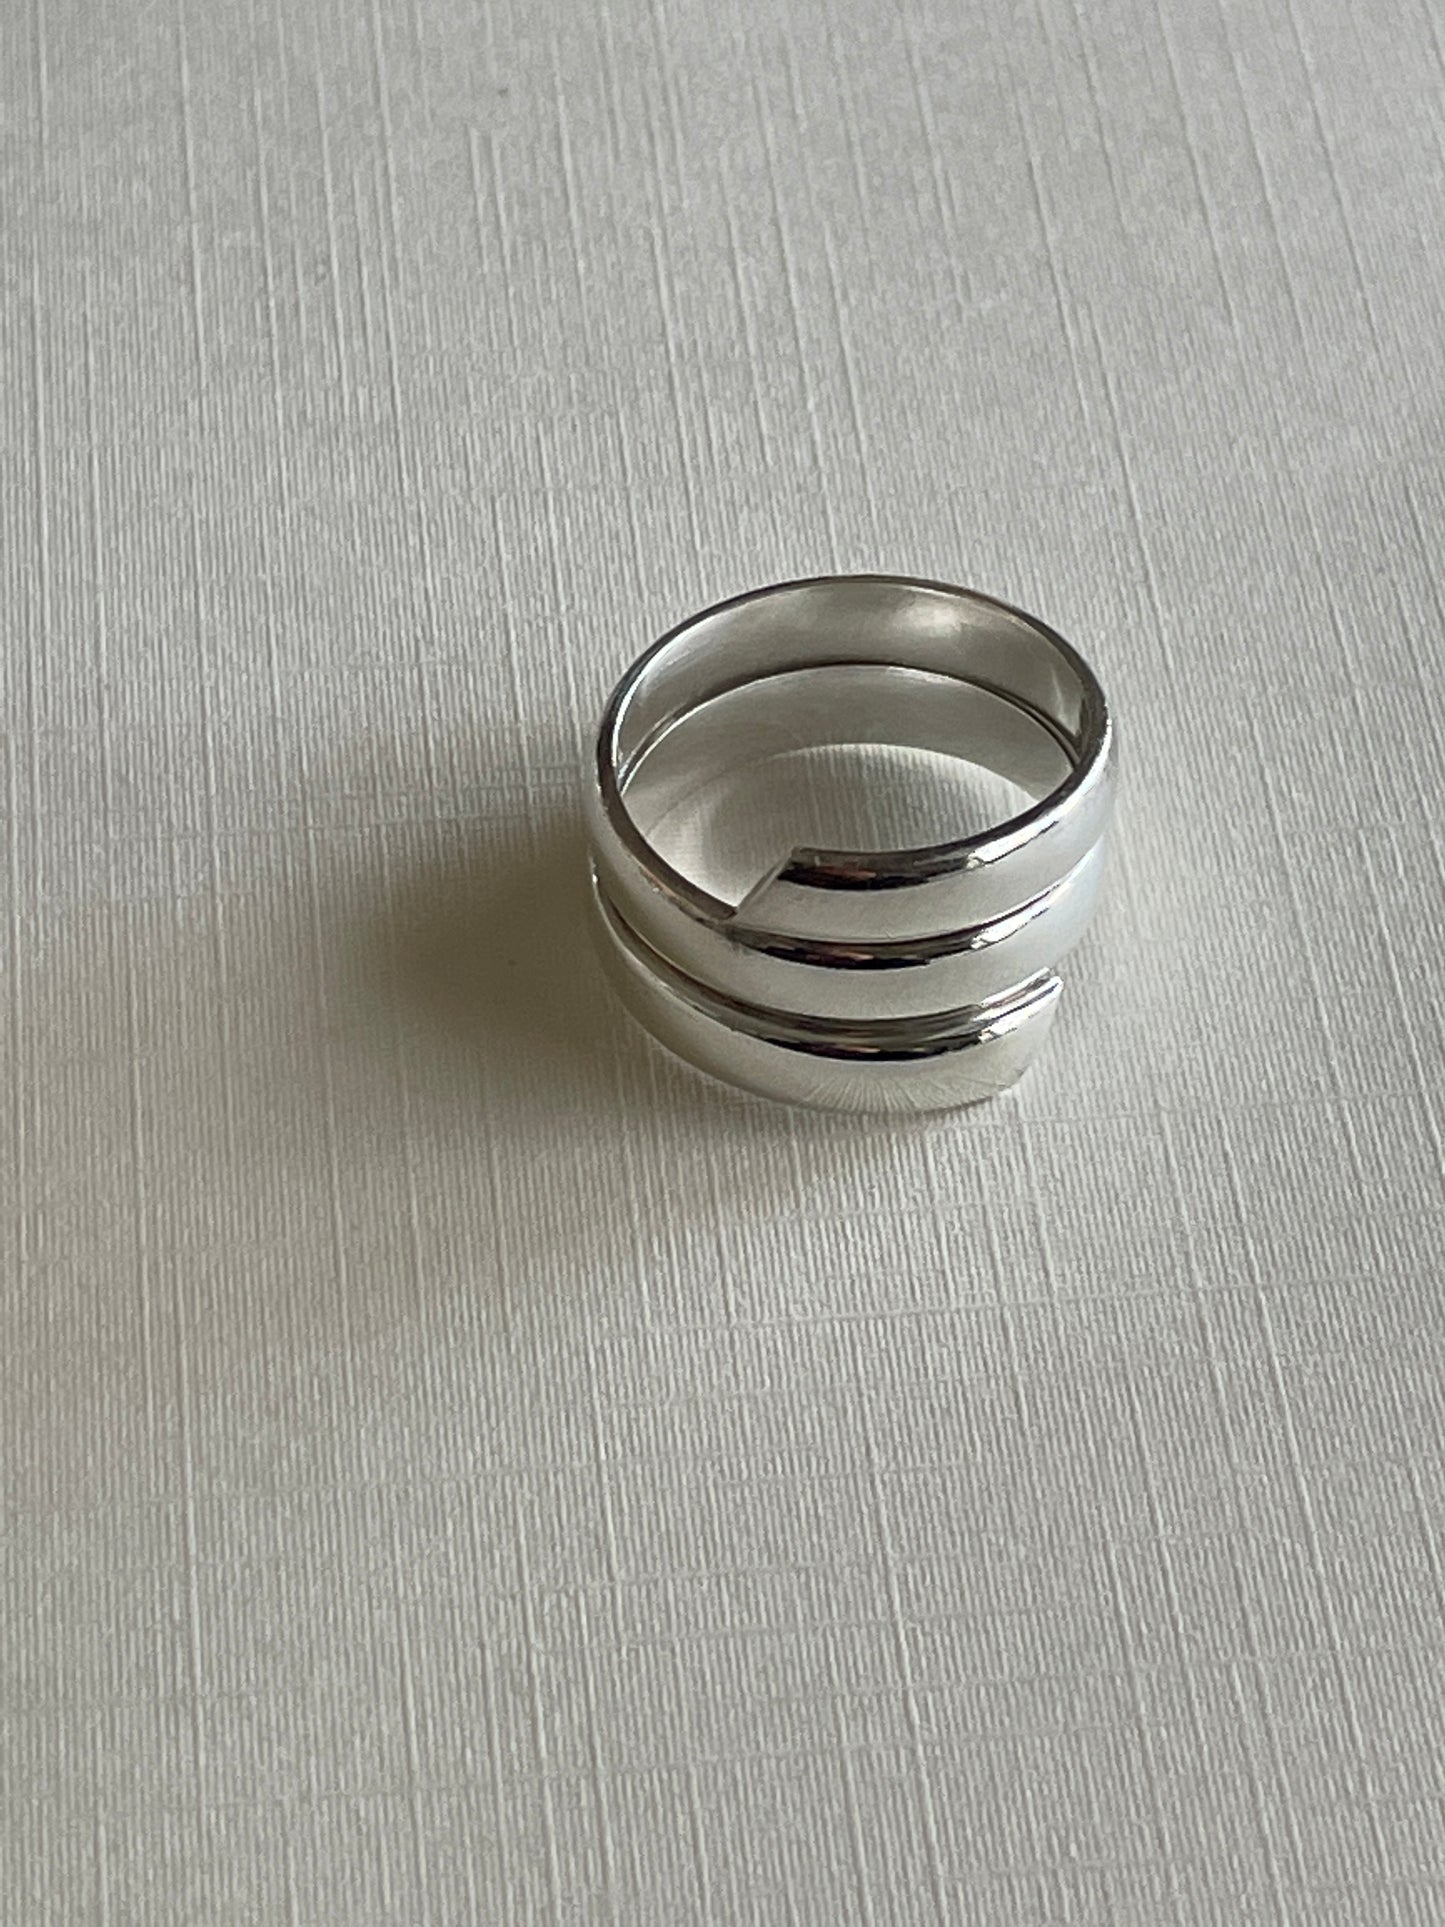 Triple Band Silver Ring